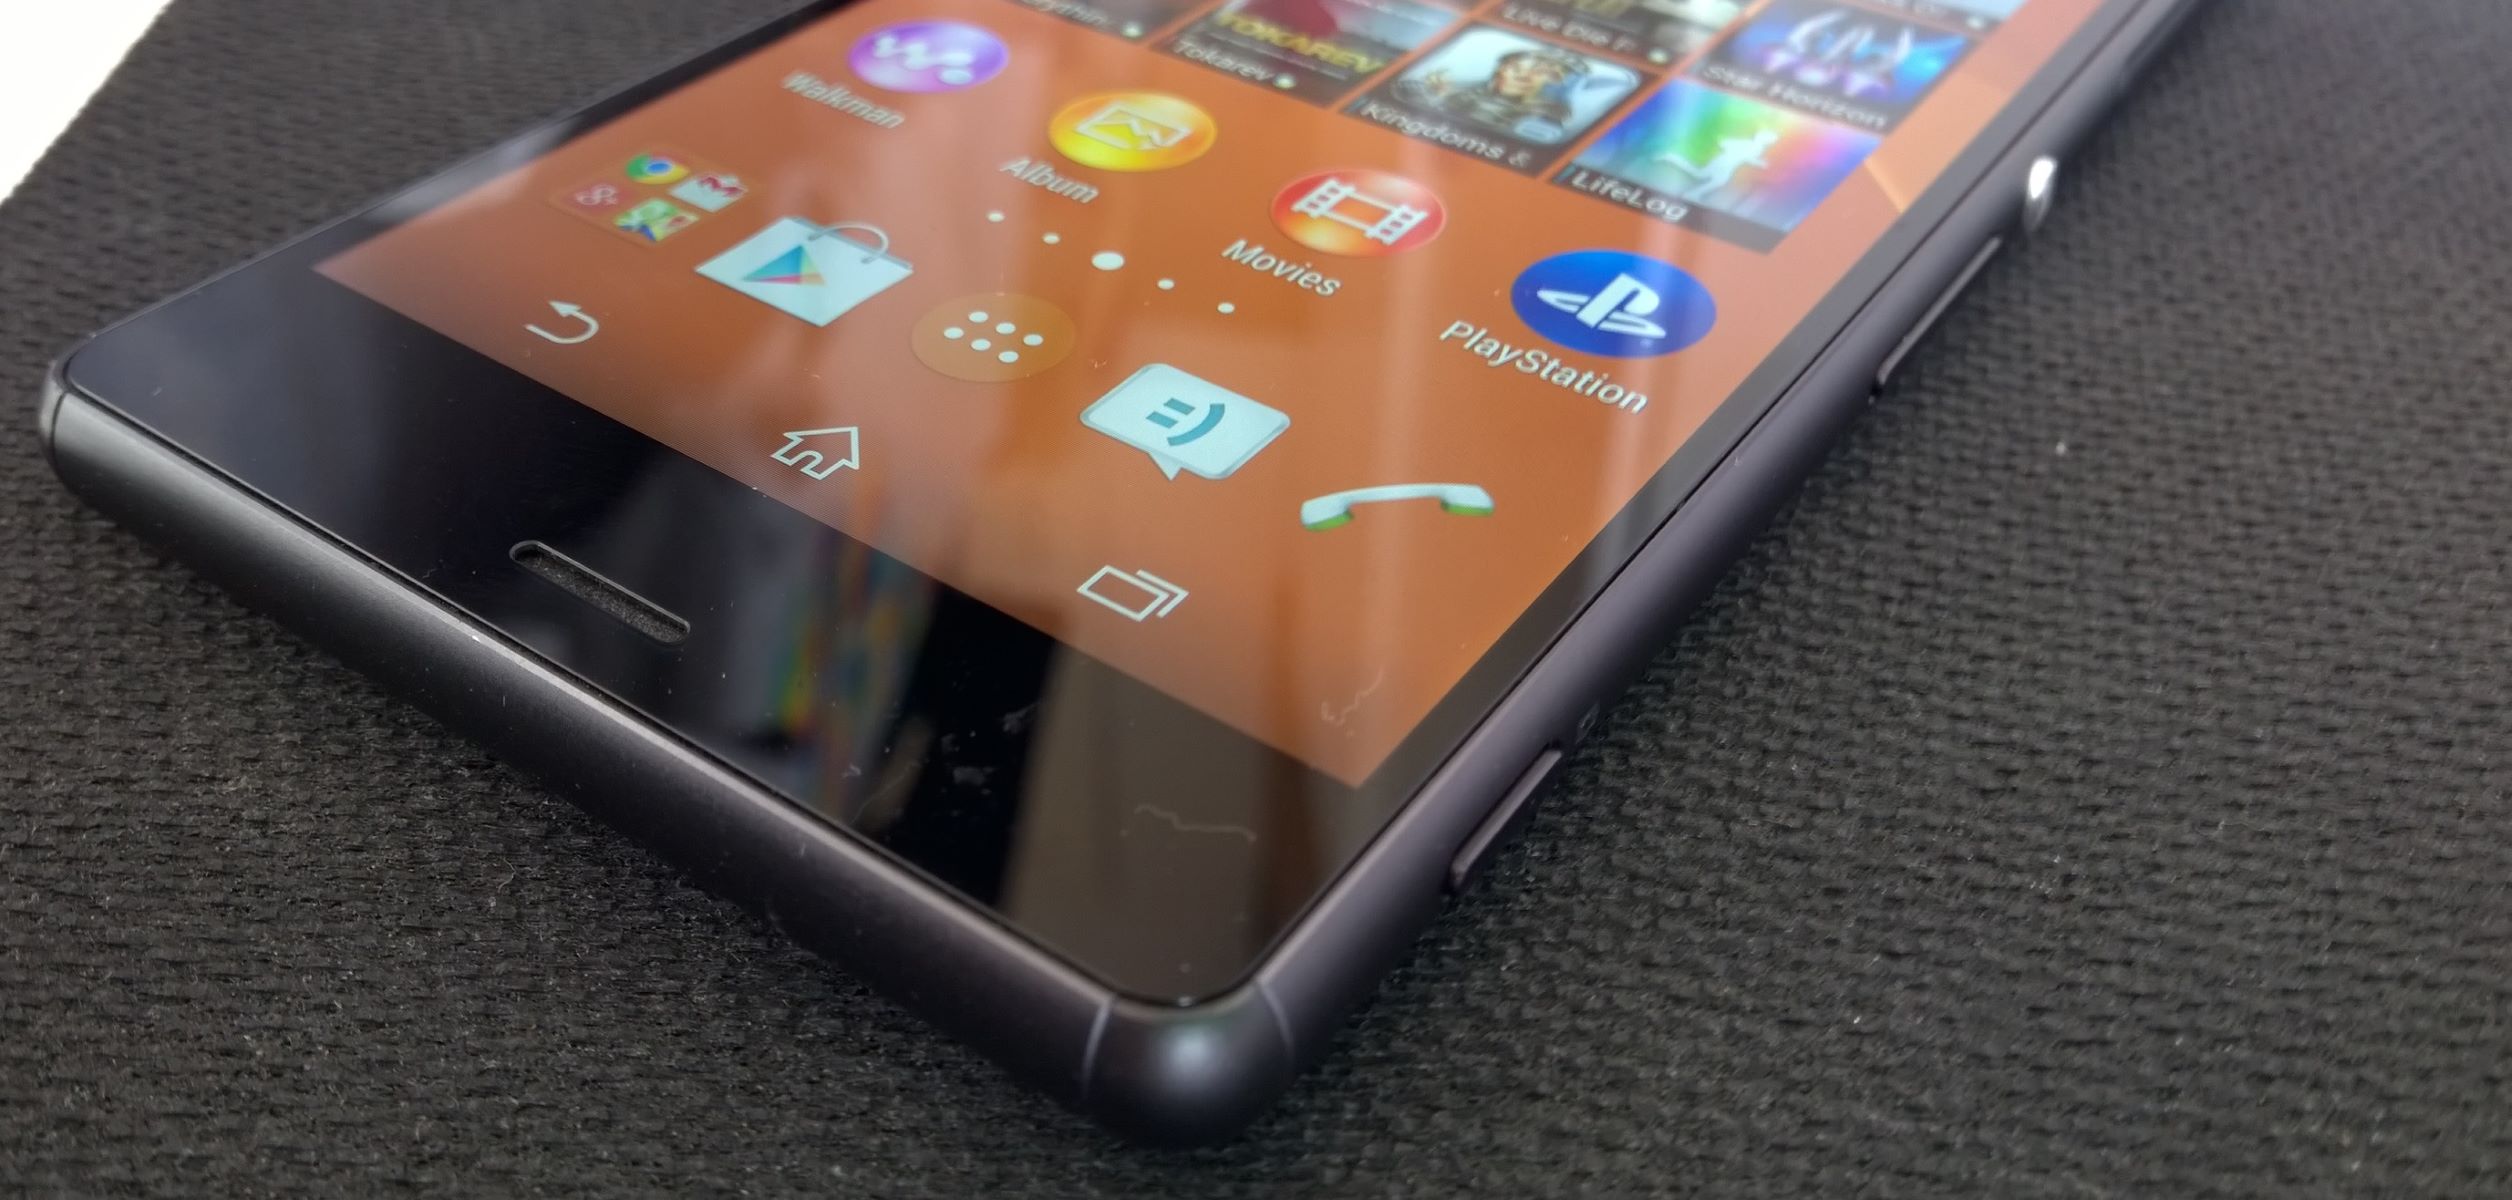 Quick Guide: Blocking Texts On Sony Xperia Z3